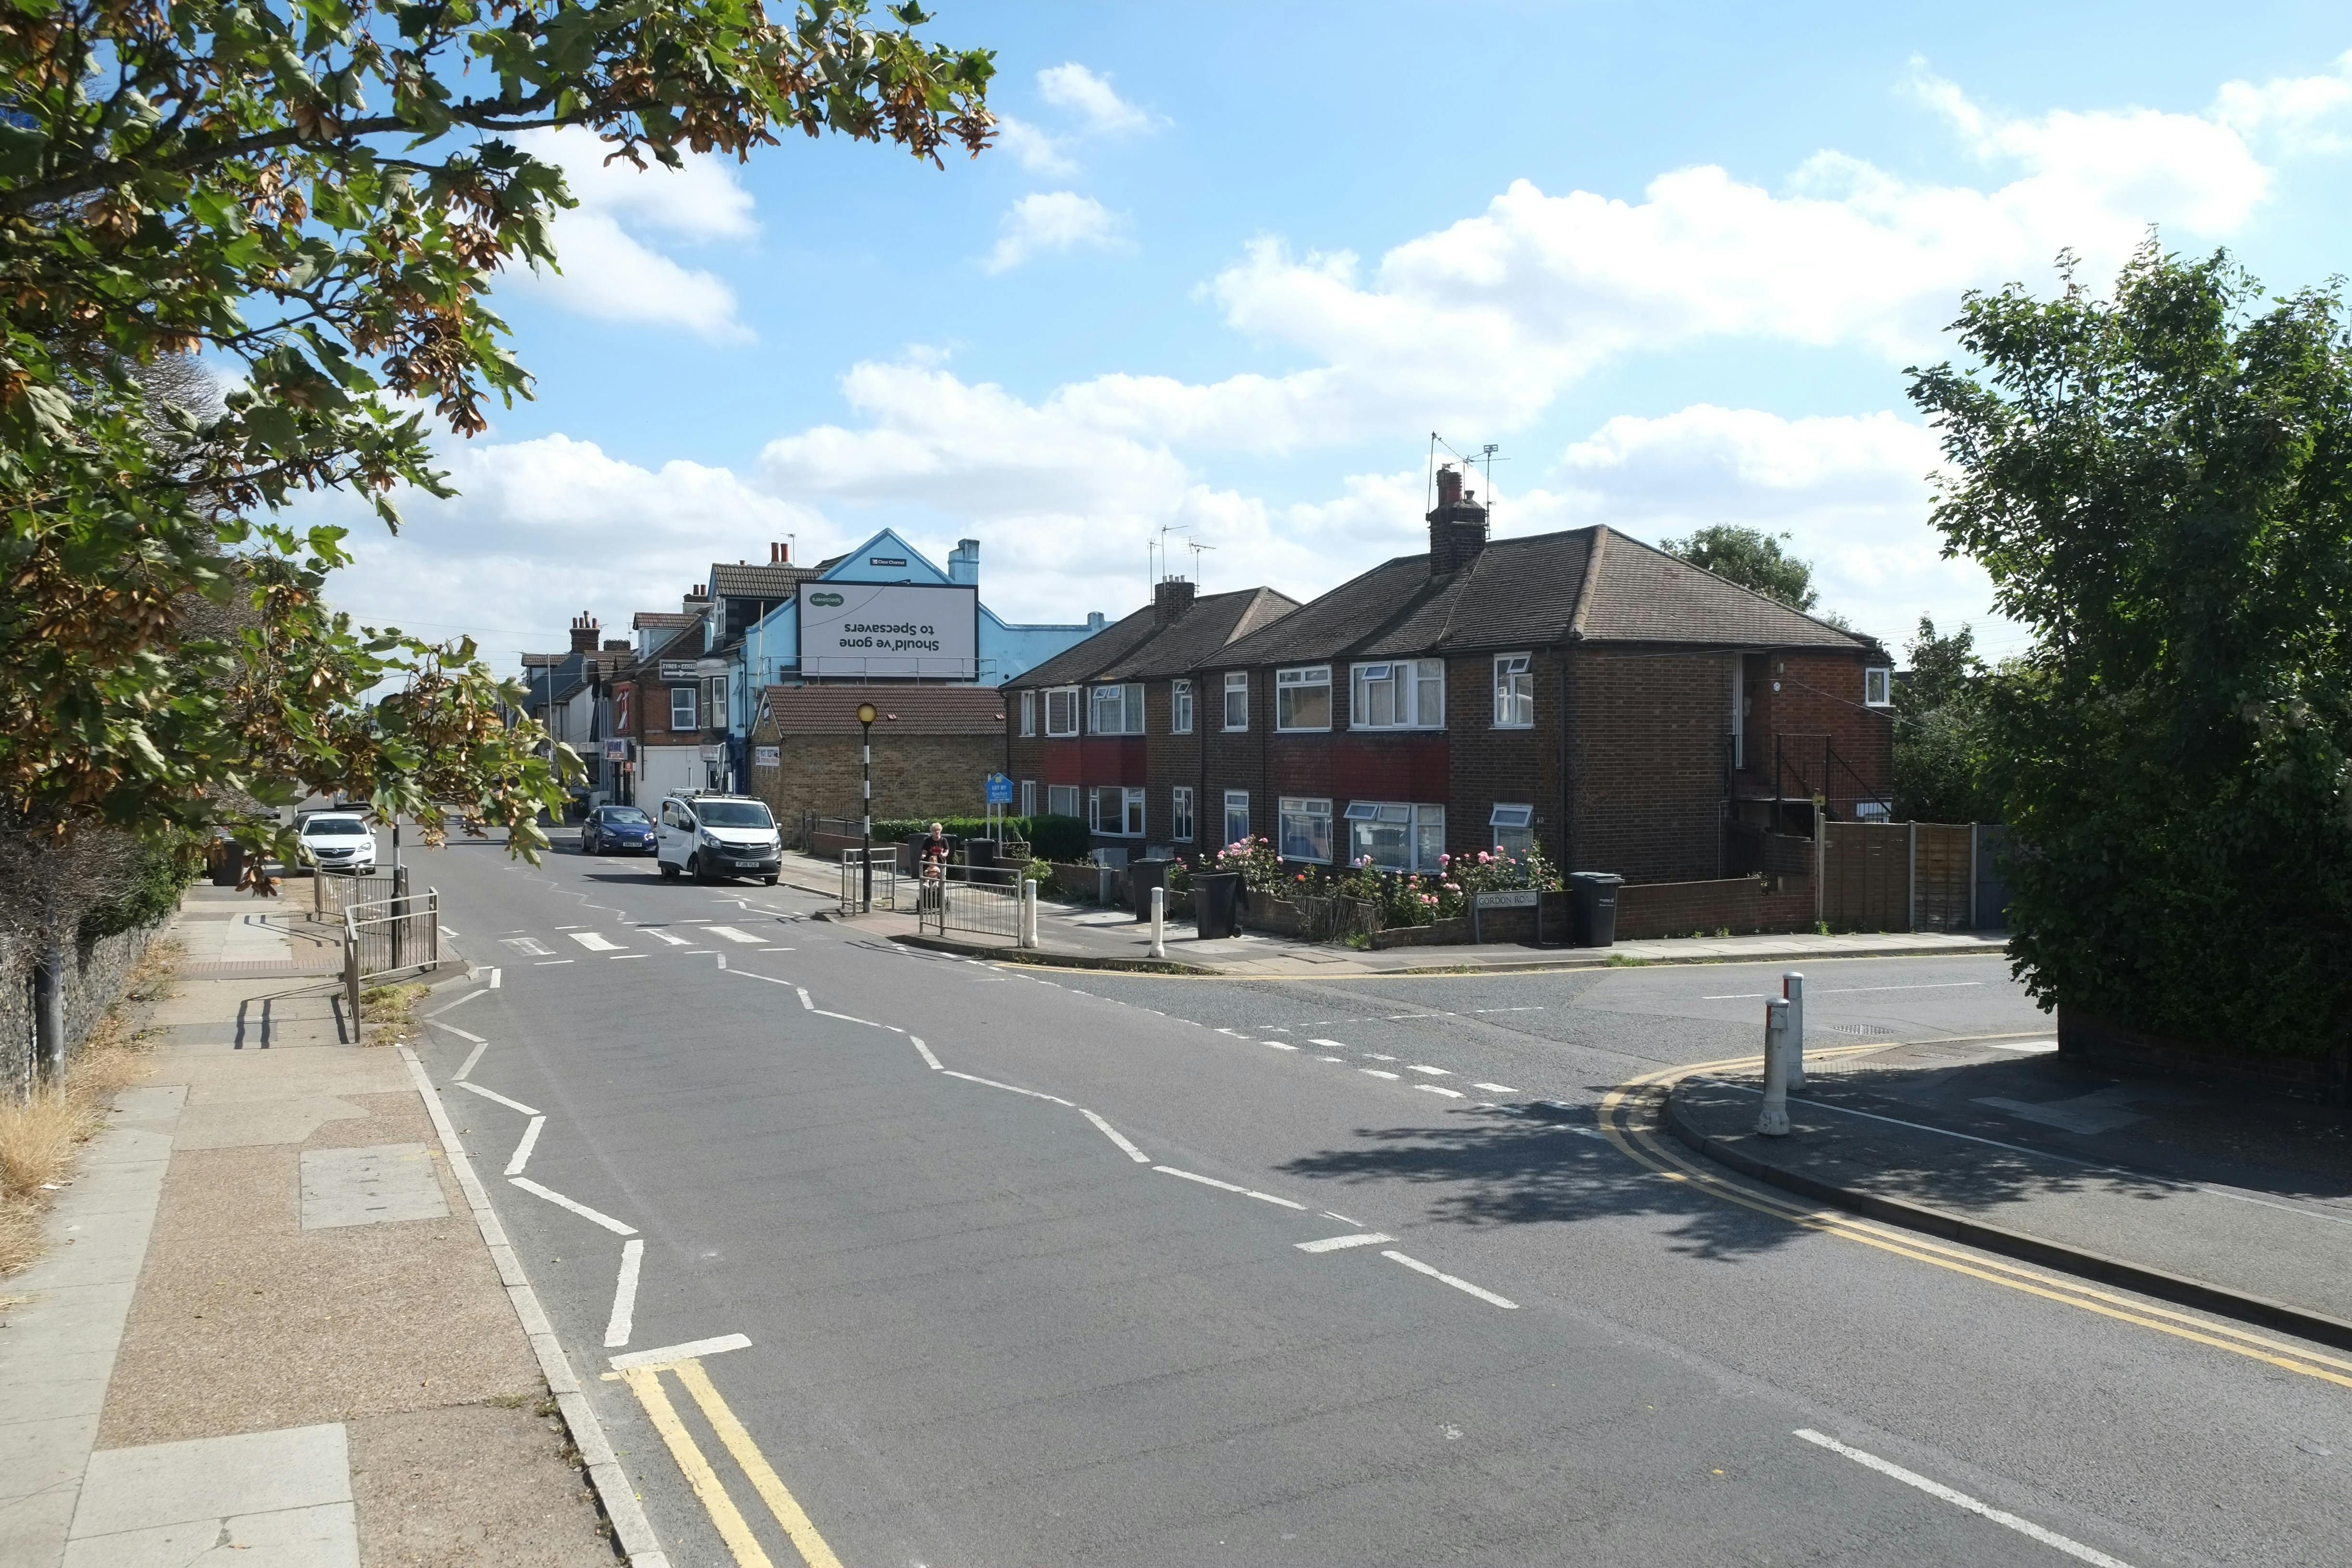 Current layout of the B2175 London Road at the junction with Gordon Road